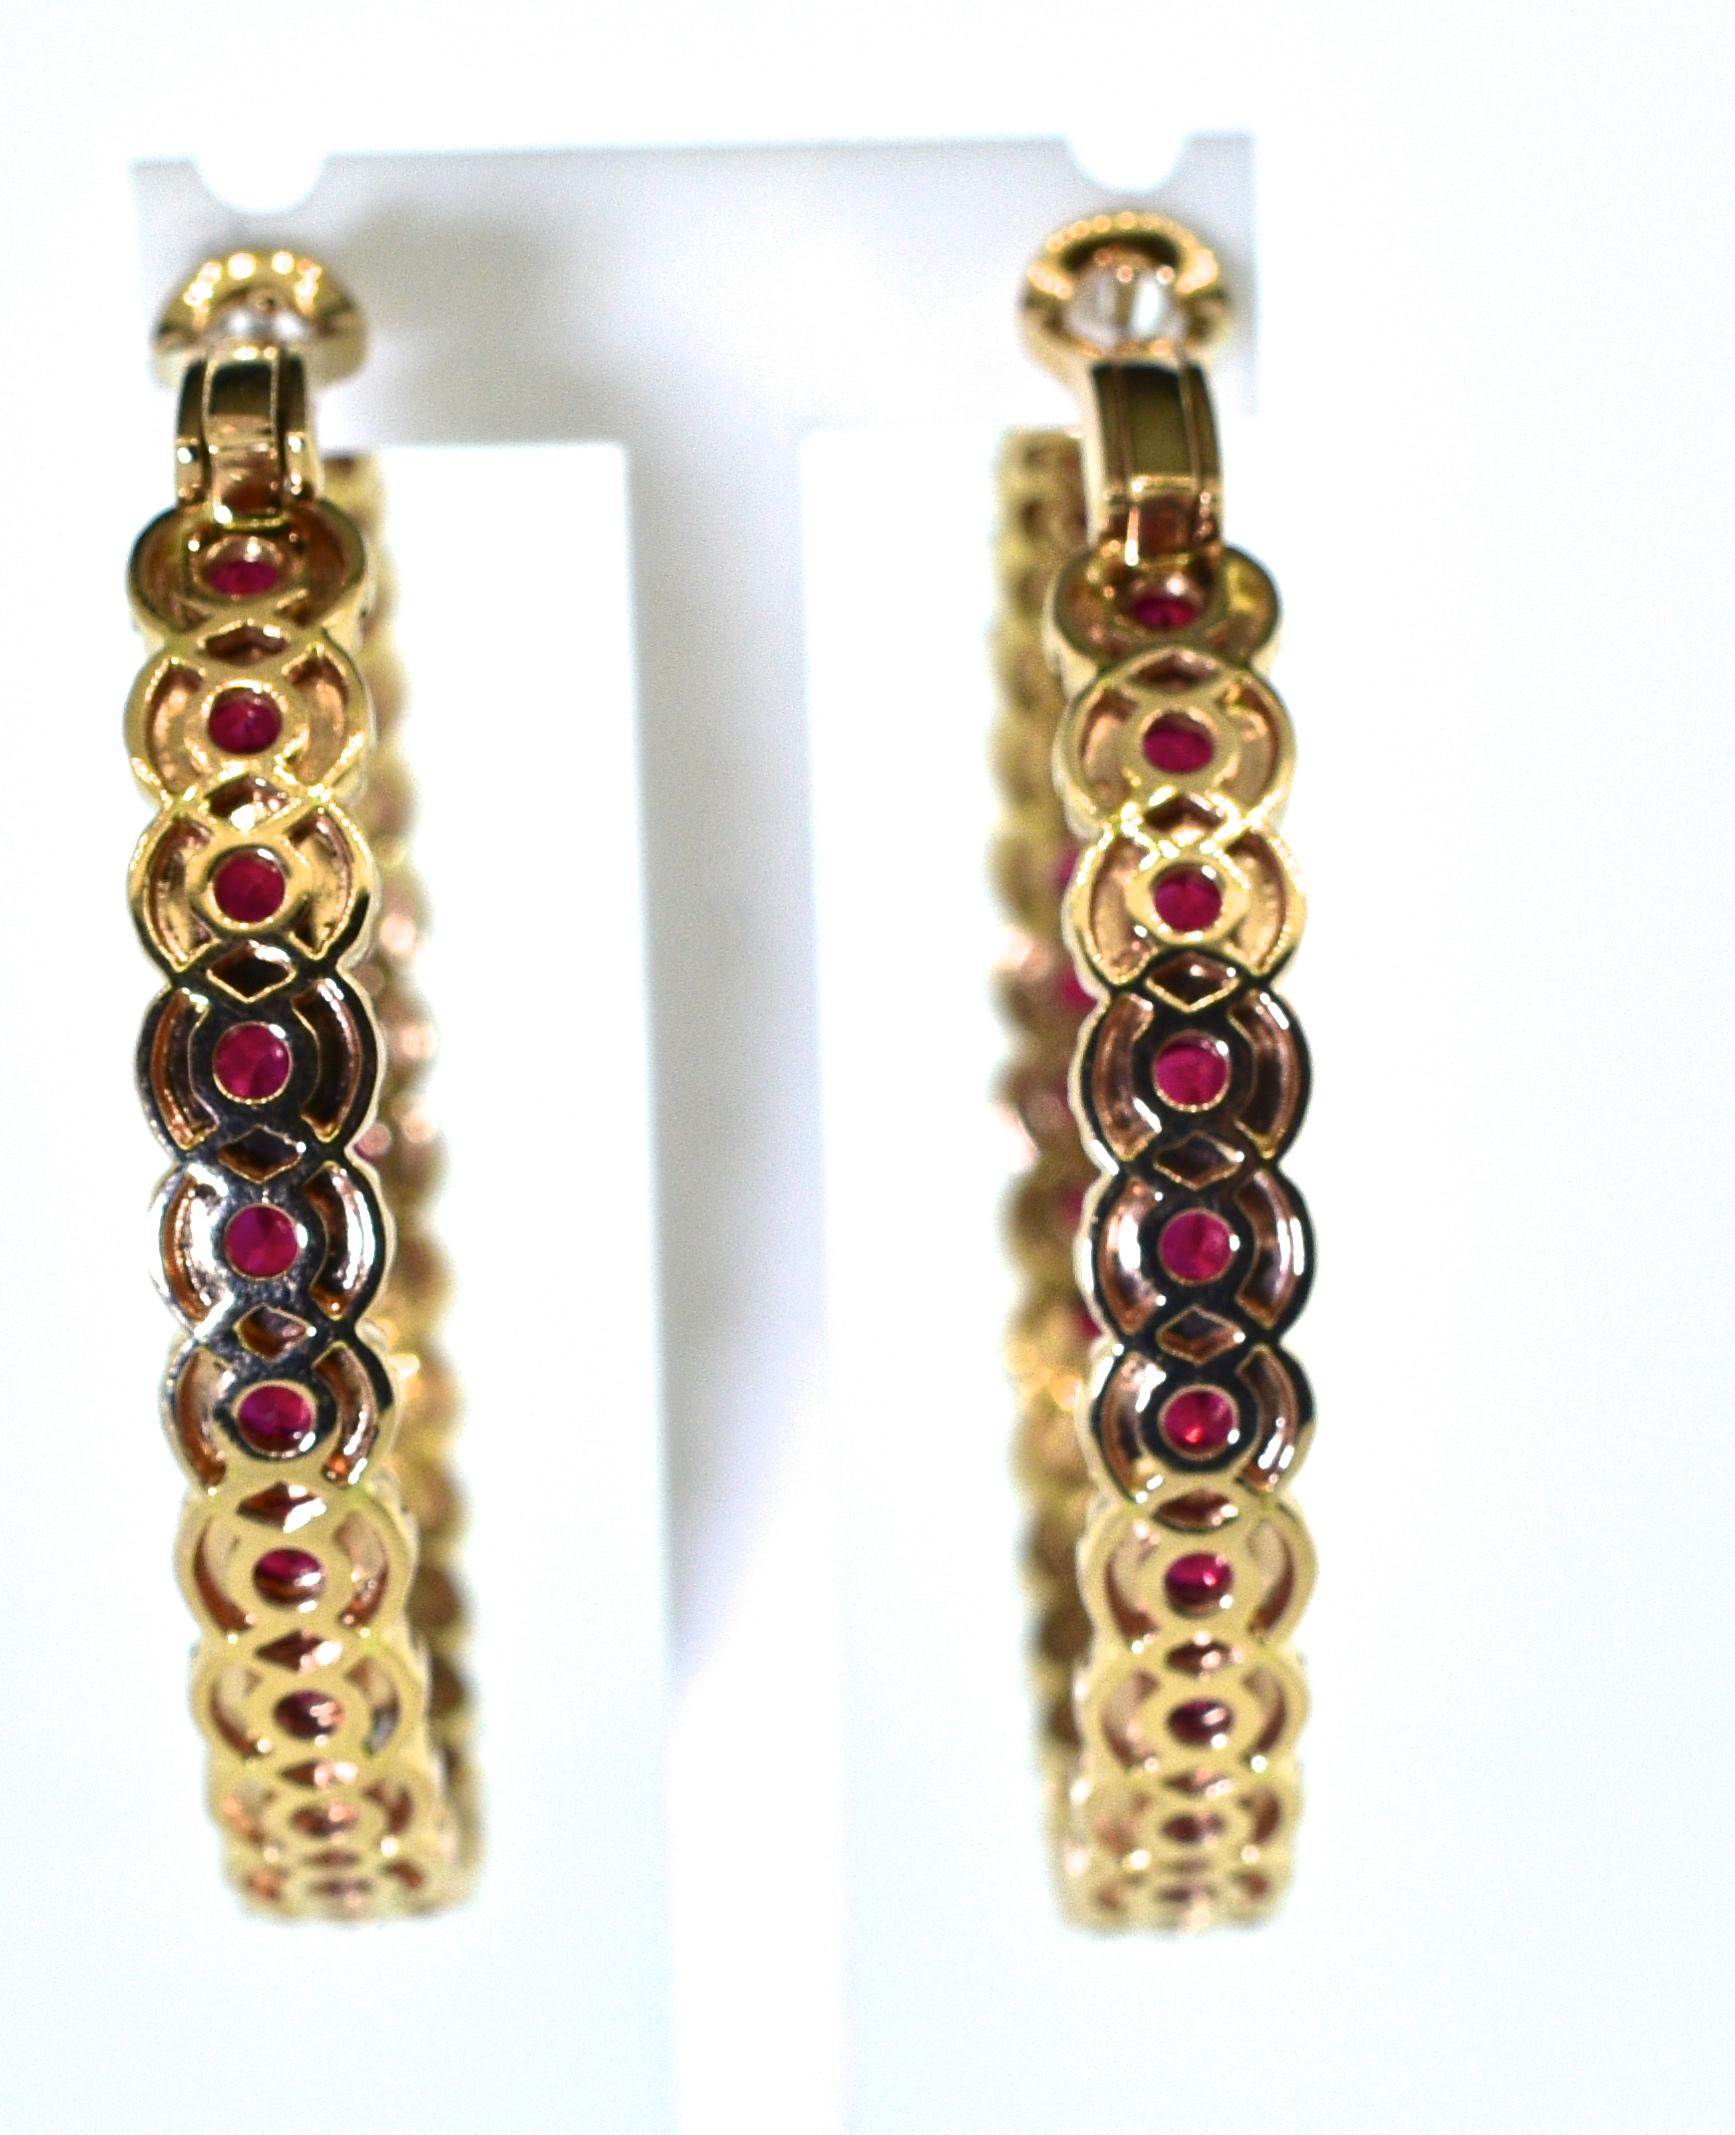 Diamond and ruby hoop earrings, large in size and well made.  There are 56 fine natural rubies weighing 5.8 cts, and 400 round brilliant cut fine white diamonds weighing 7.0 cts.  These 18K rose gold hoops have an interior diameter of 1.58 inches. 